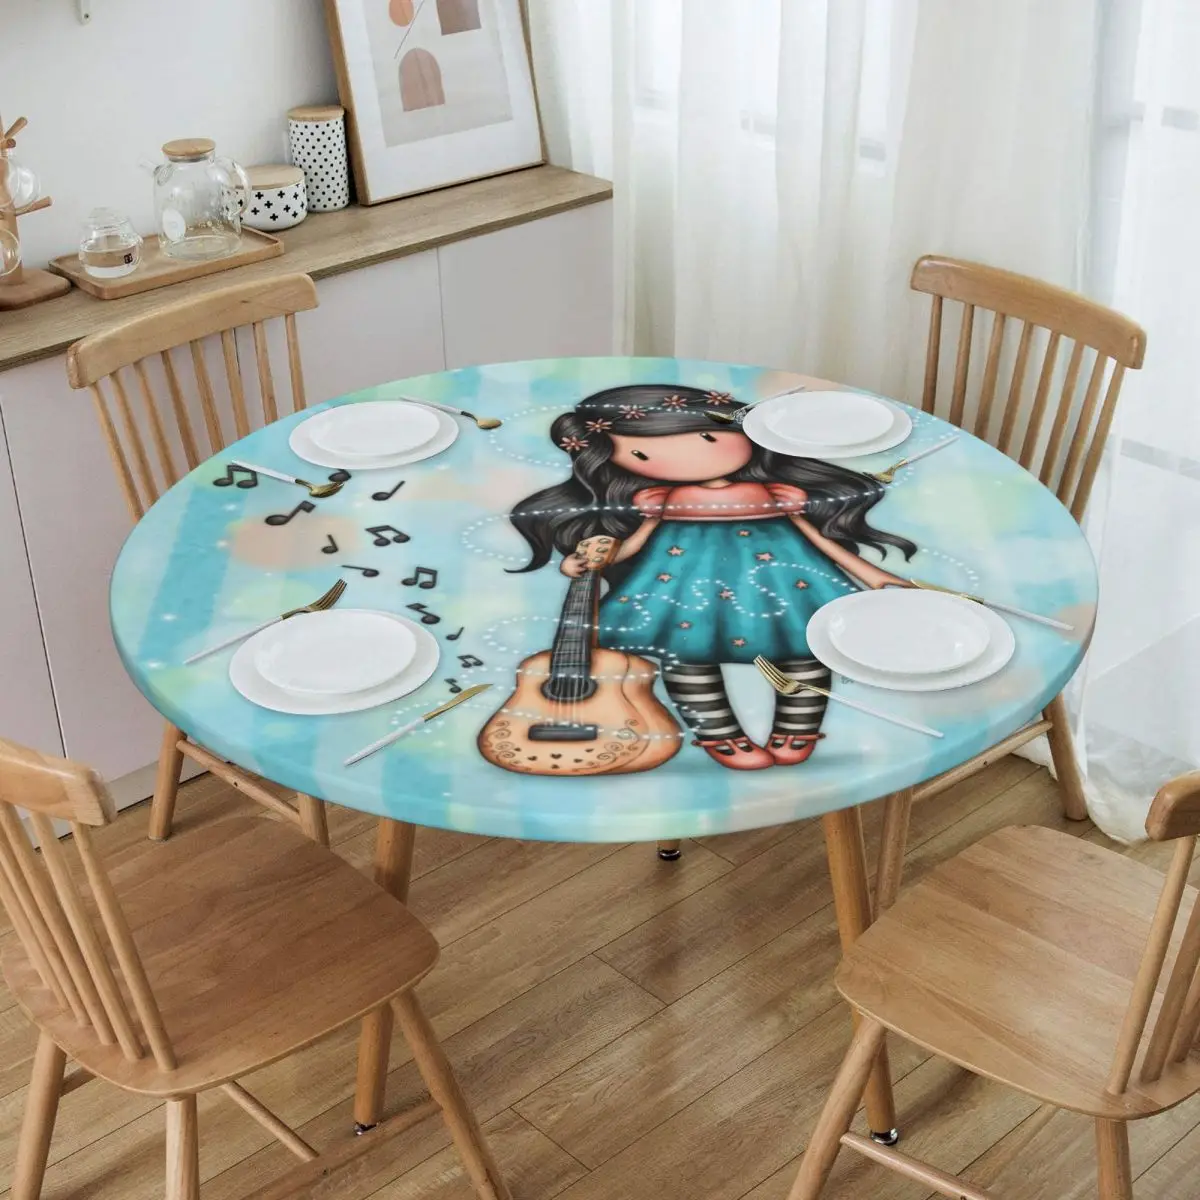 

Round Anime Girl Santoro Gorjuss Table Cloth Oilproof Tablecloth 40"-44" Table Cover Backed with Elastic Edge